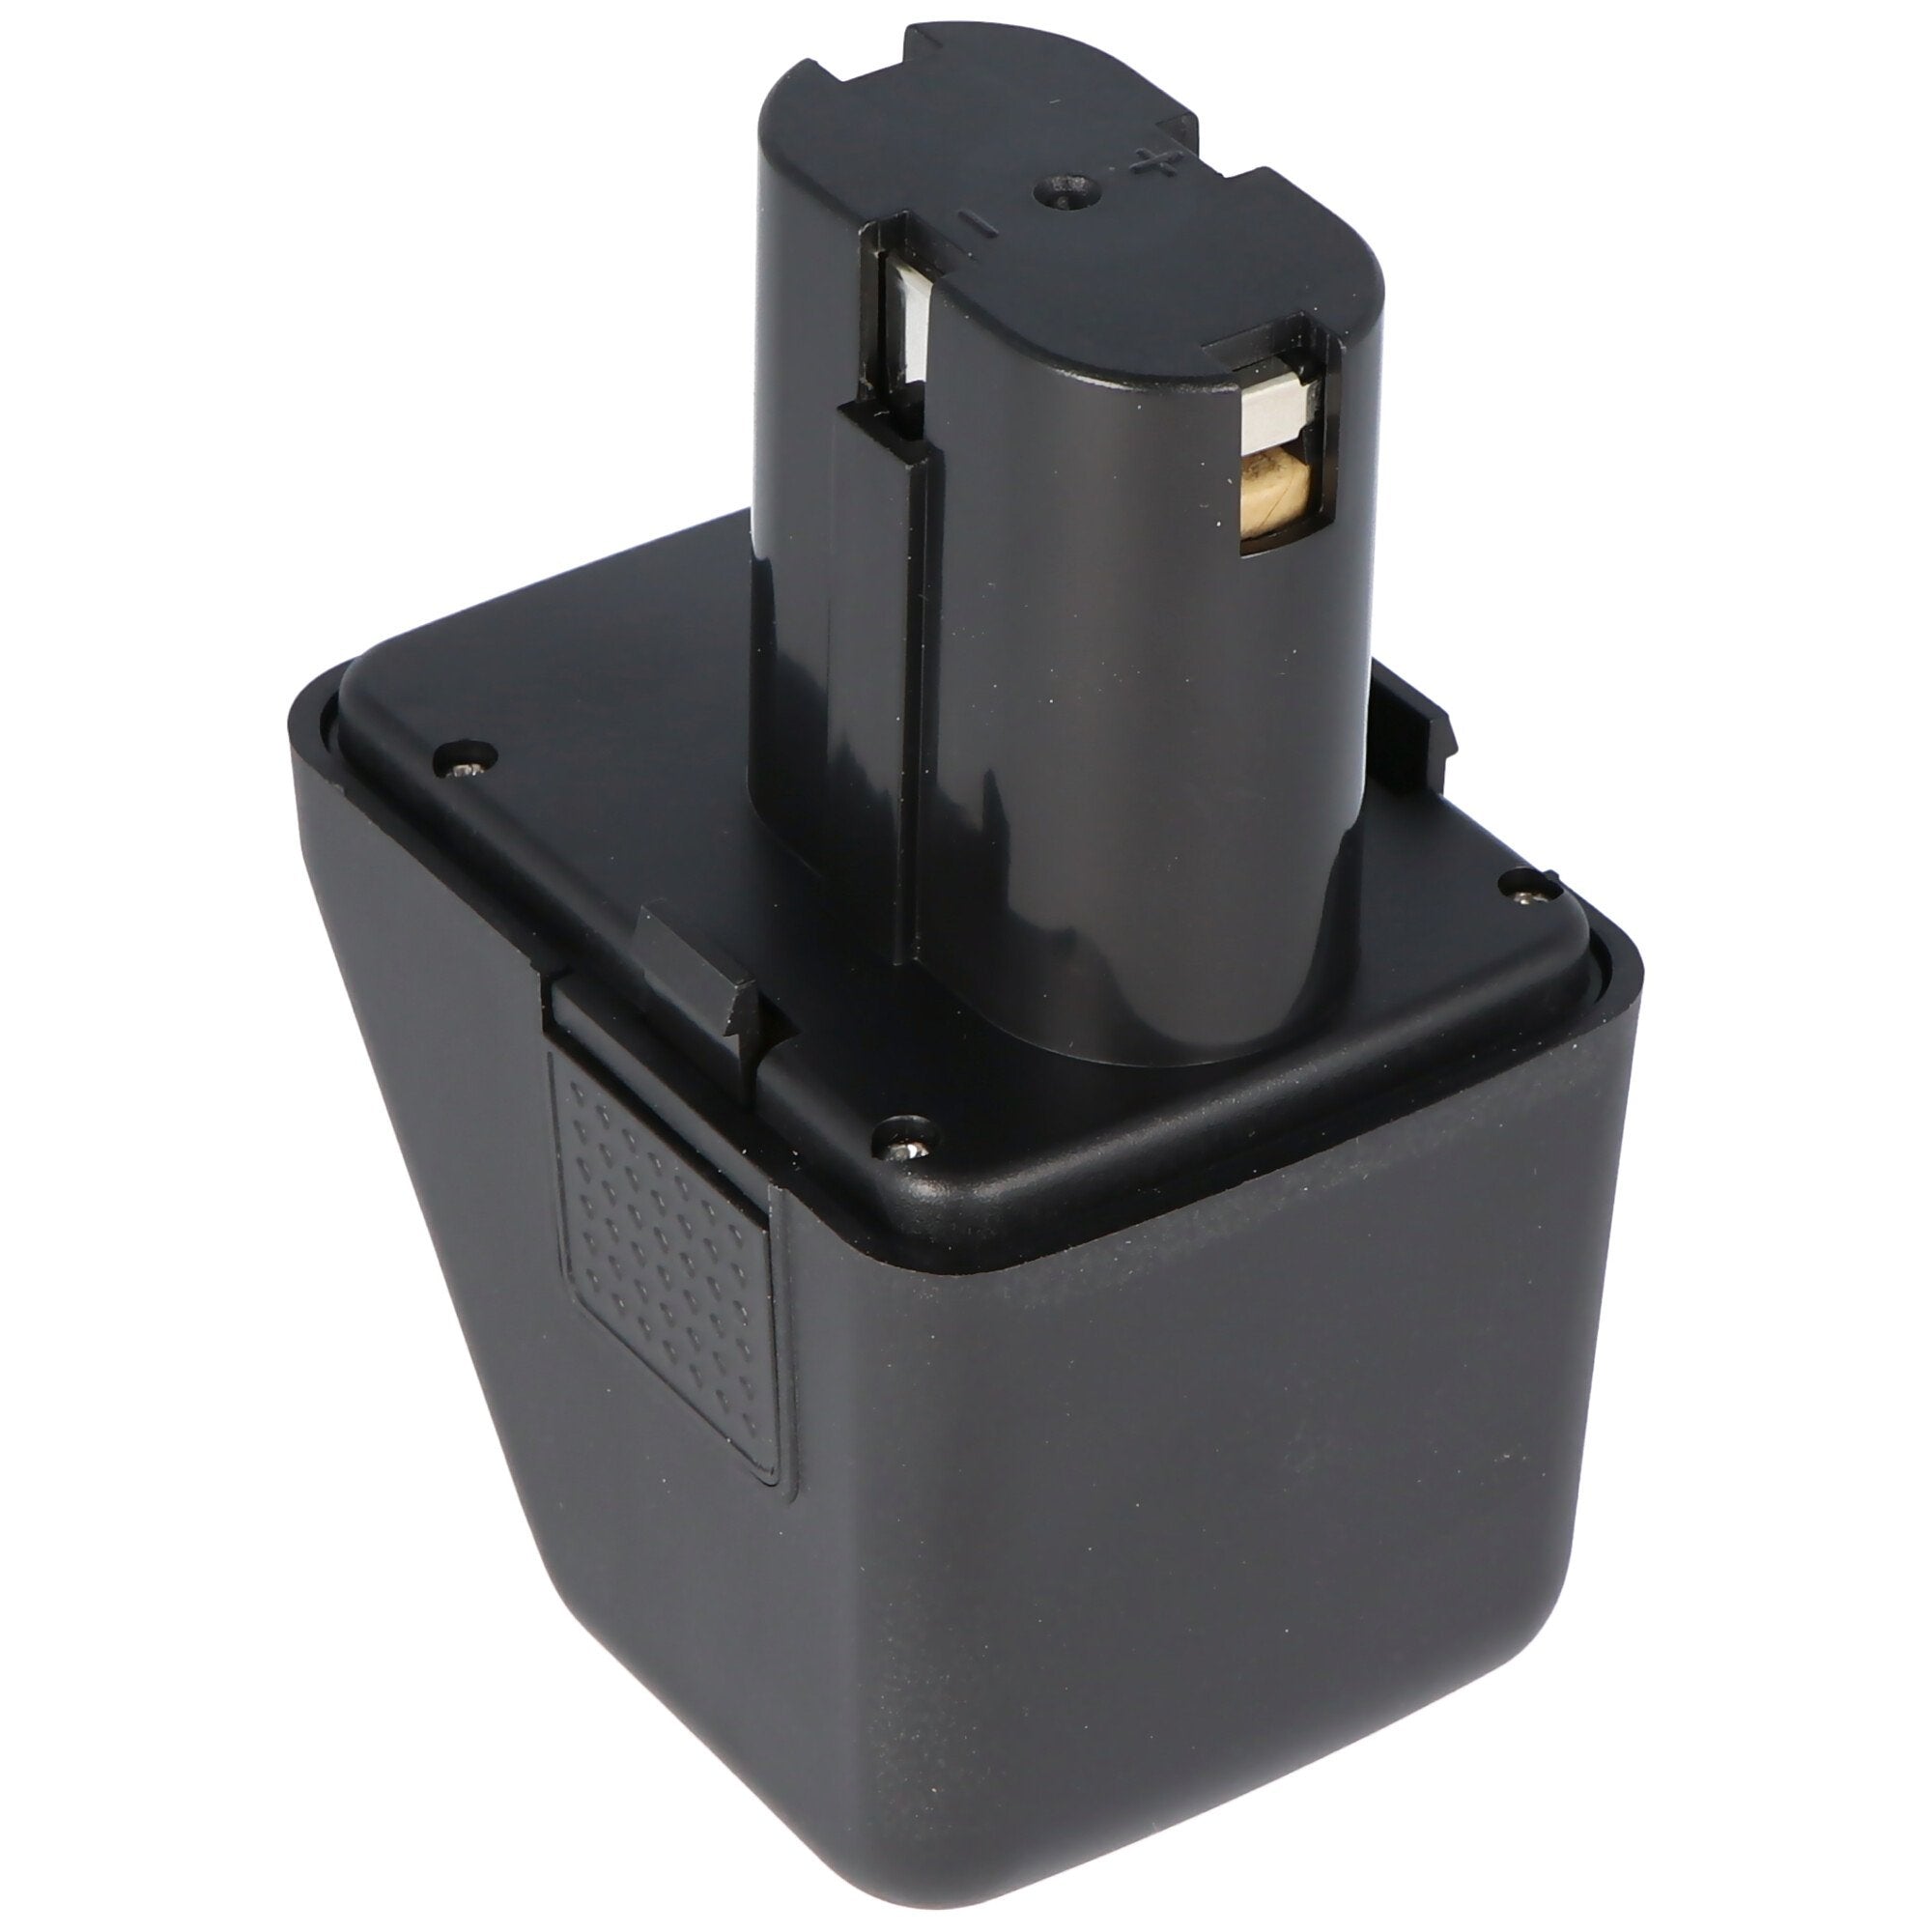 Battery suitable for Gesipa tools 12V 1.4Ah, Würth G12, 070291510, ANG 12, 0702915, 0702915 10, 0702